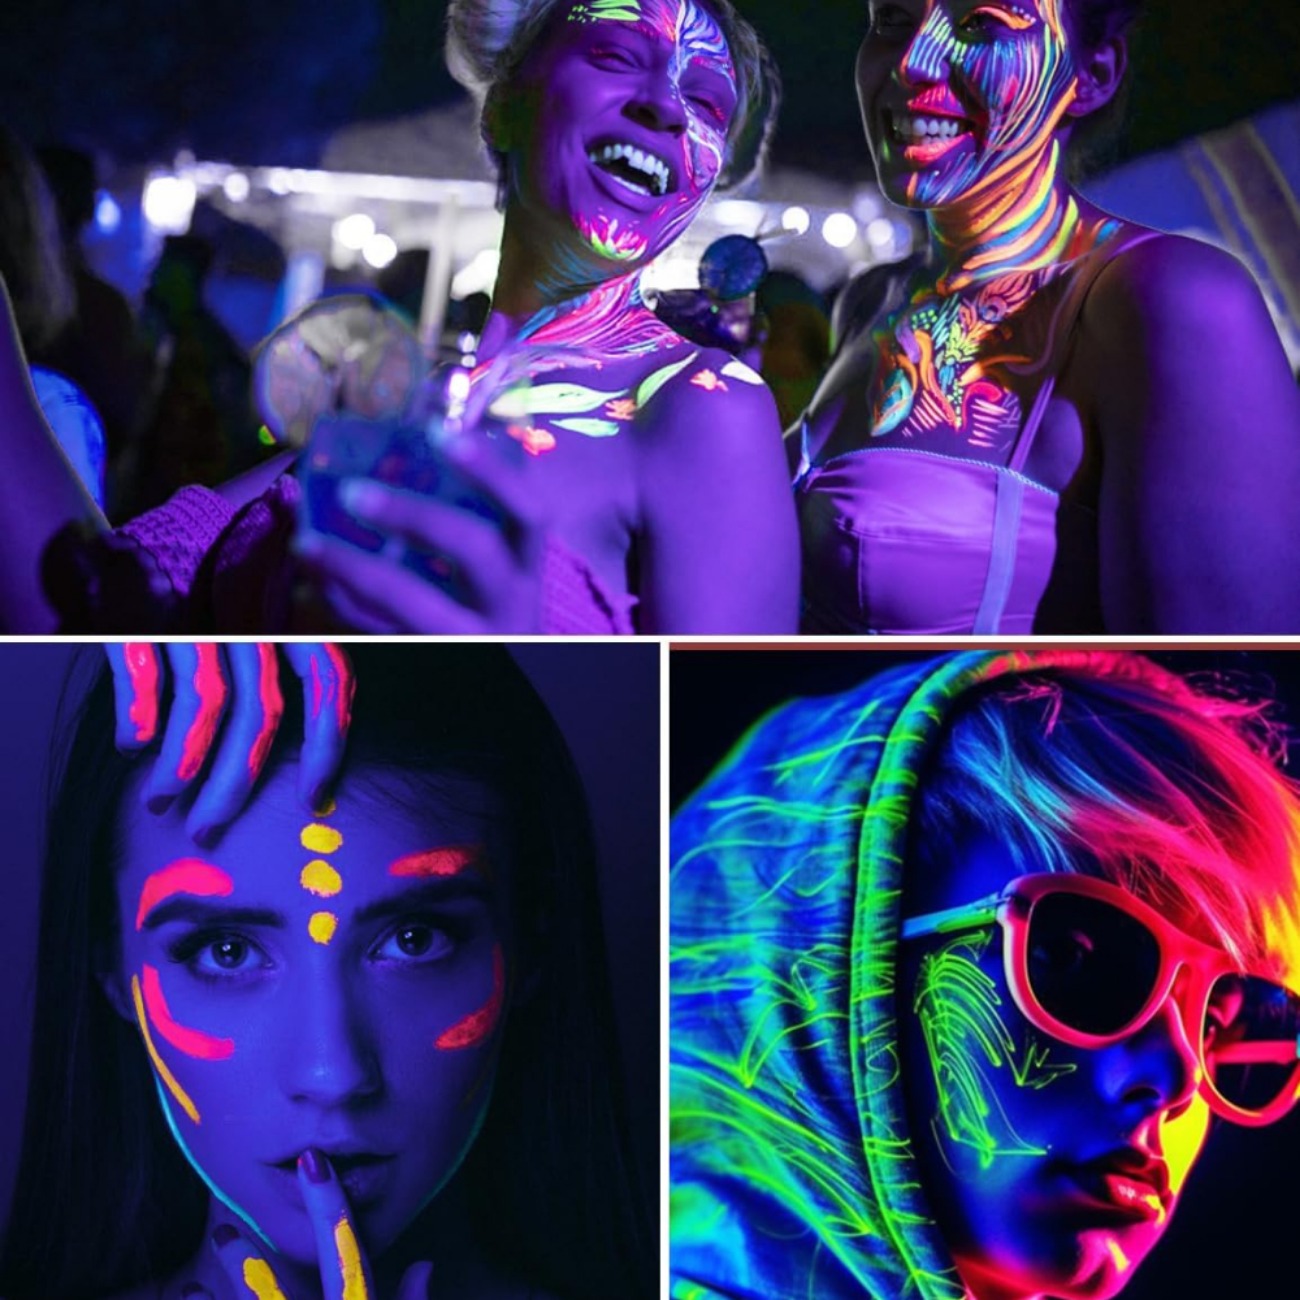 Artist uses glowing UV paint to decorate : r/woahdude